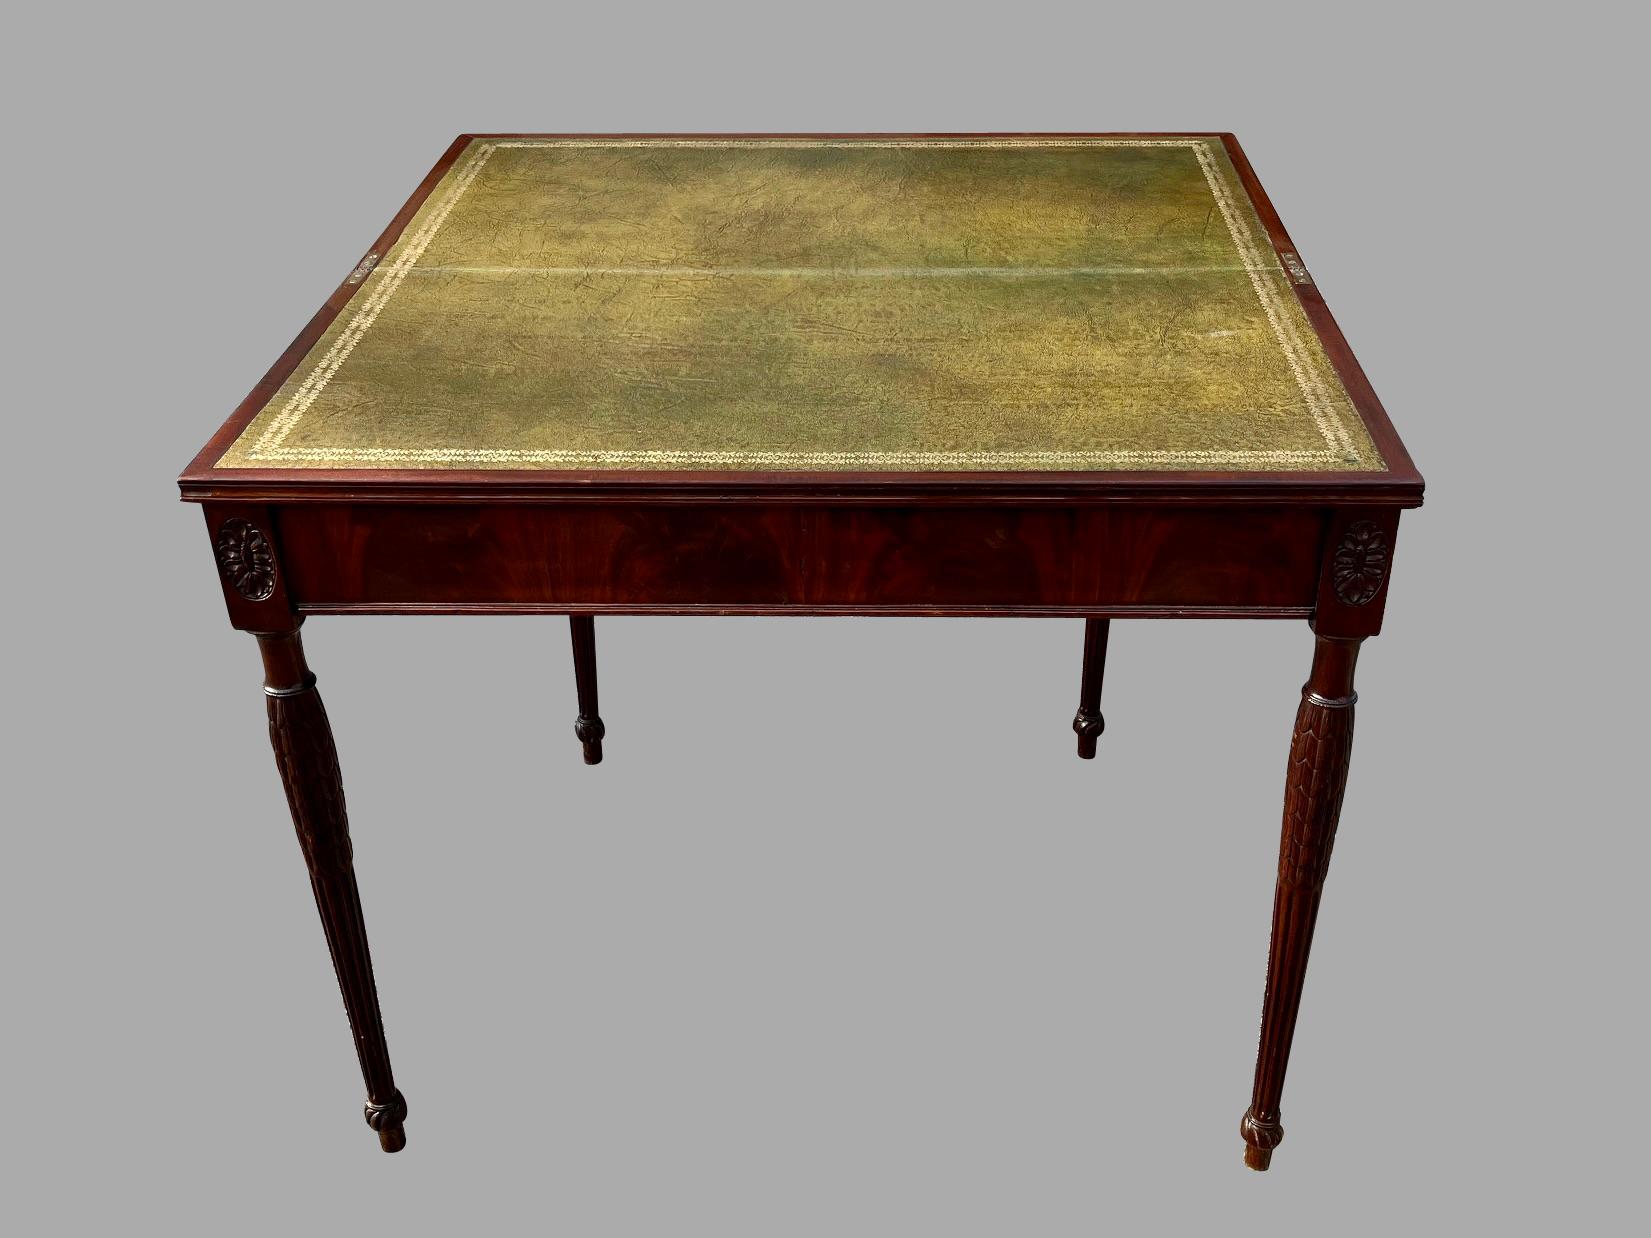 English Sheraton Mahogany Flip Top Games Table with Gilt-Tooled Leather Top  For Sale 5